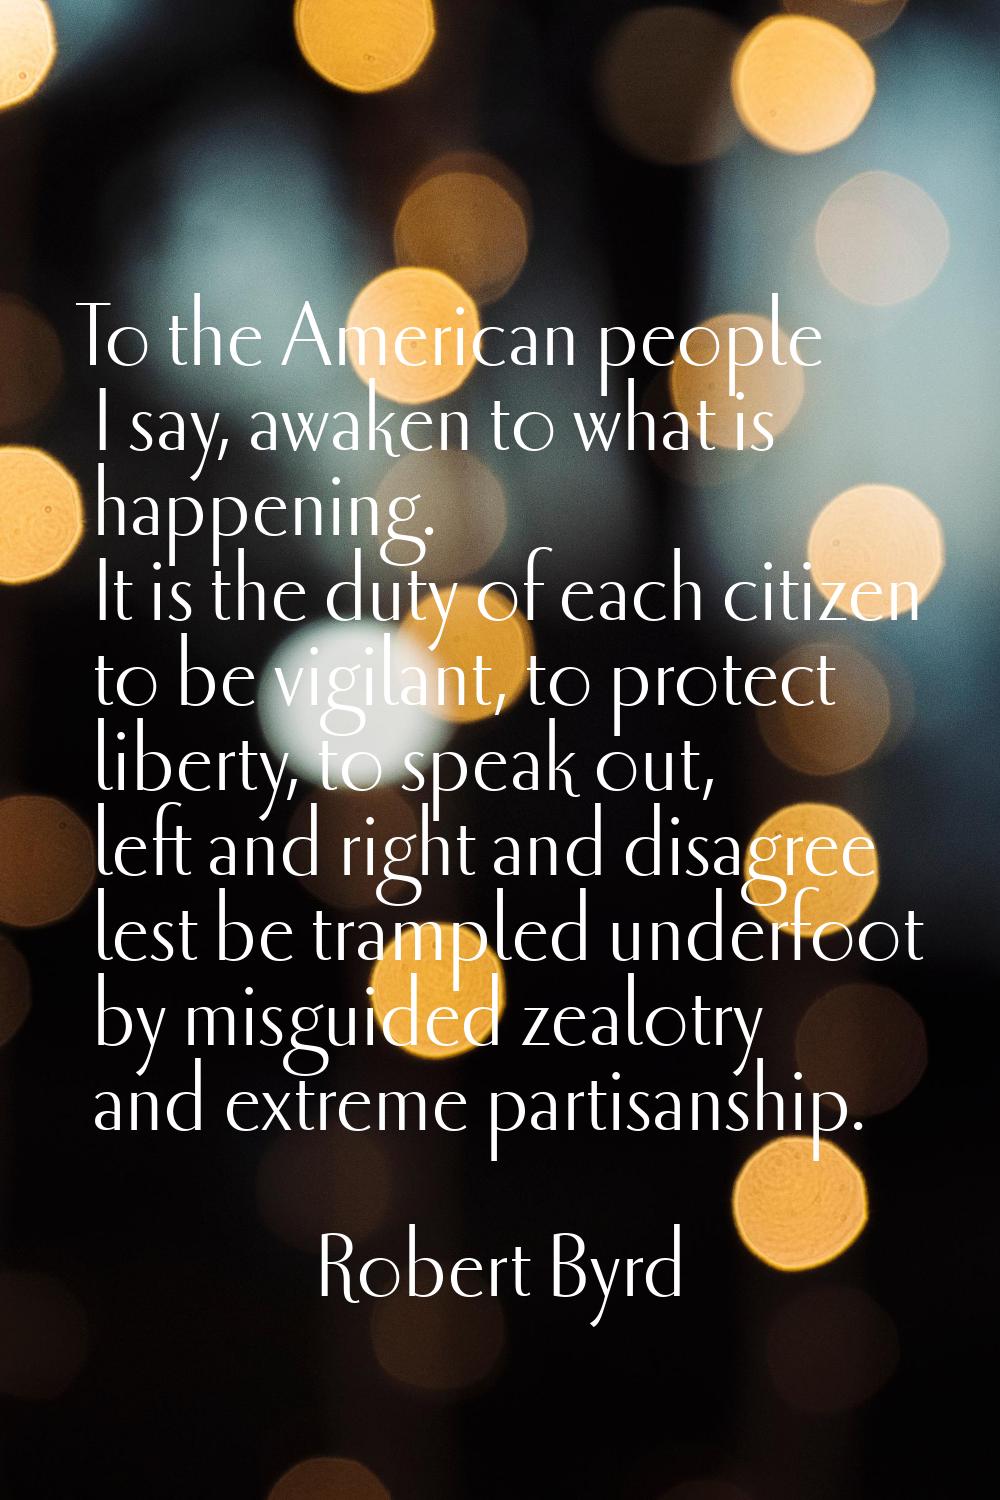 To the American people I say, awaken to what is happening. It is the duty of each citizen to be vig